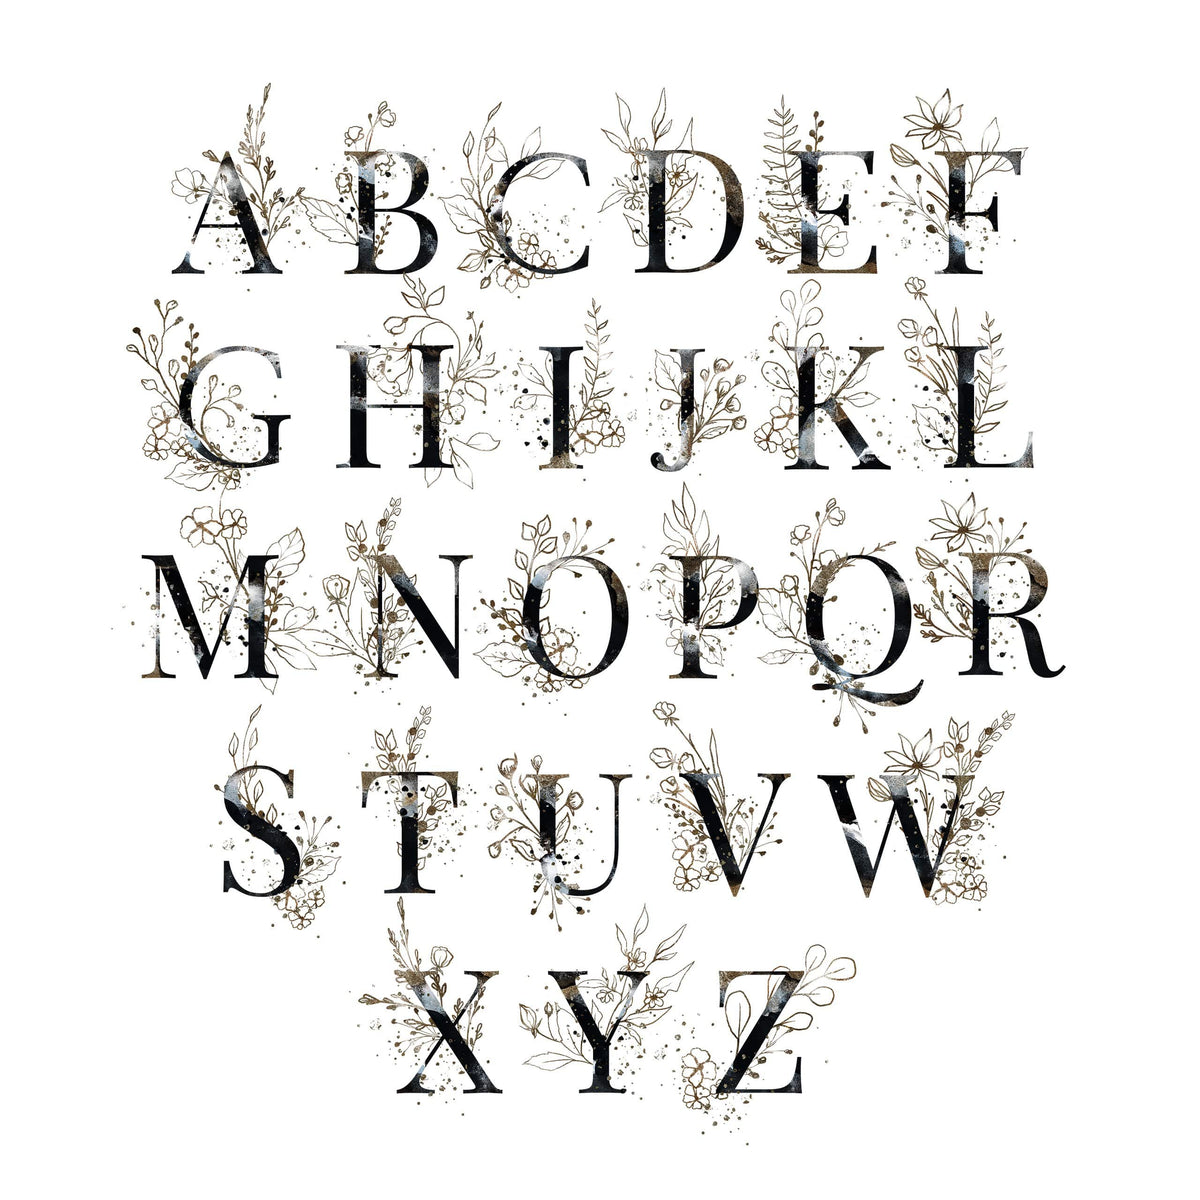 Floral alphabet for personalization from Personal Prints